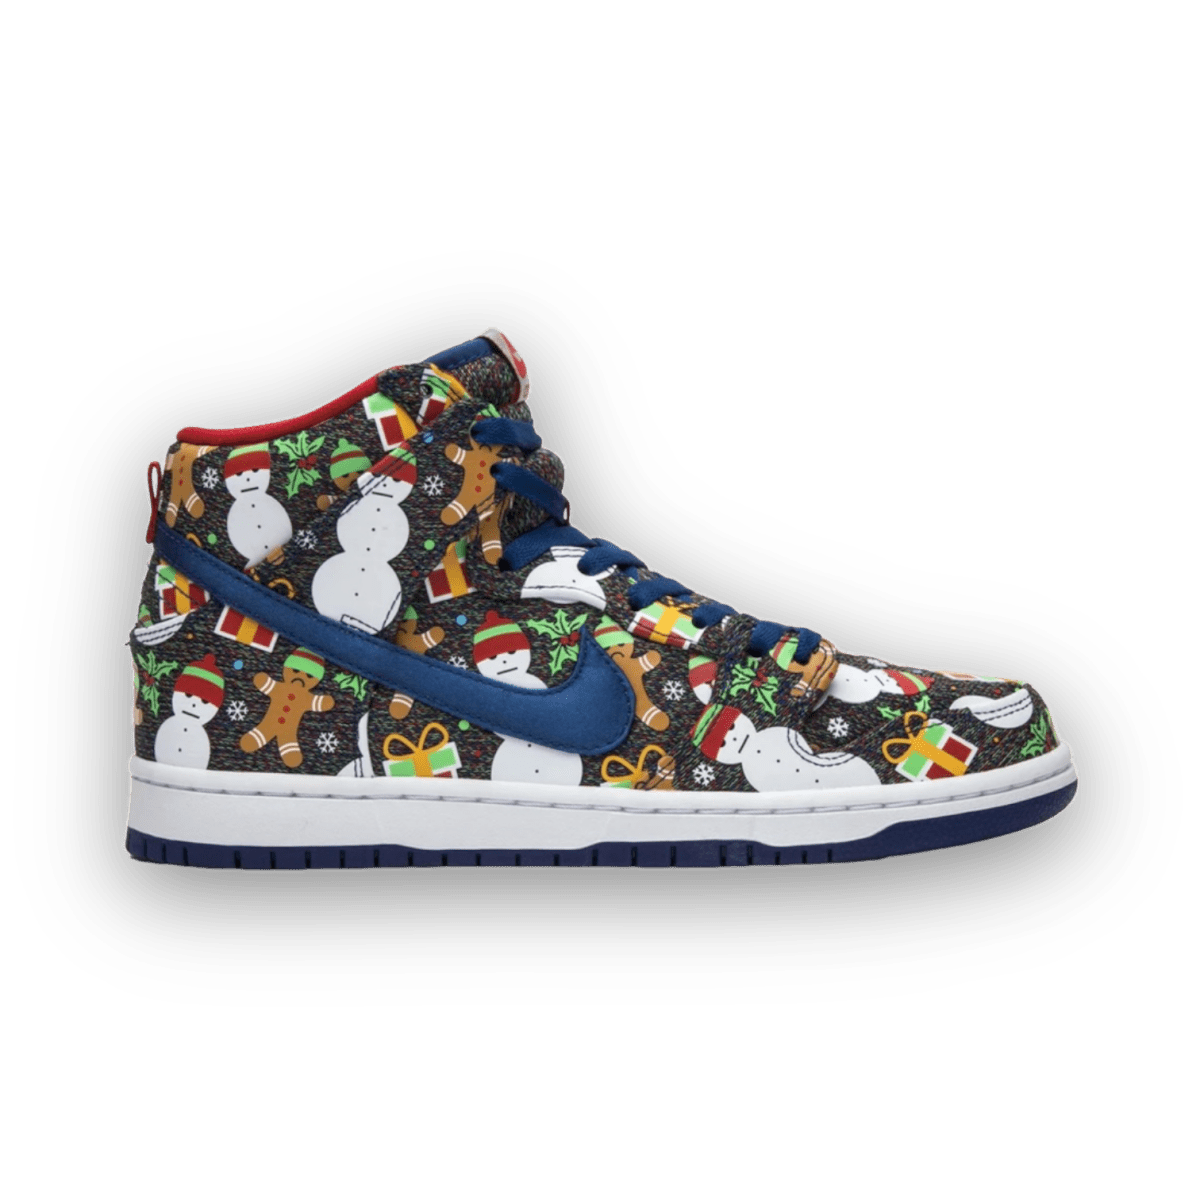 Concepts x SB Dunk Pro High 'Ugly Christmas Sweater' - High Sneaker - Jawns on Fire Sneakers & Streetwear